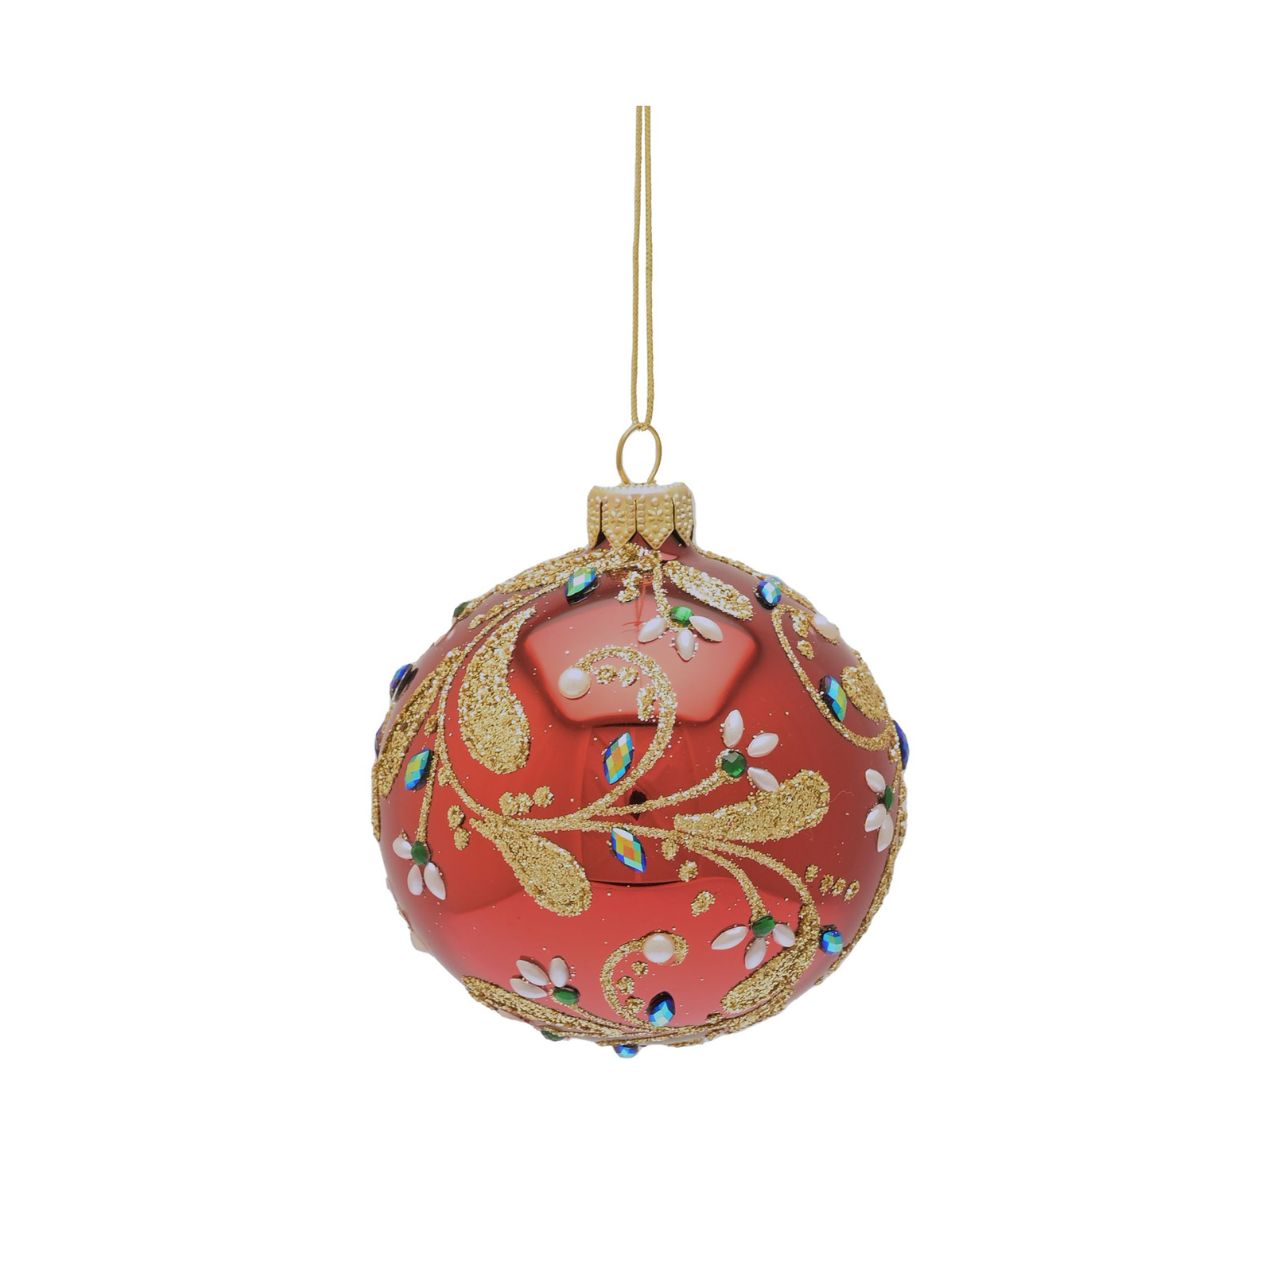 Red Christmas Bauble Leaf Design Hand Decorated  A Leaf hand decorated red bauble by THE SEASONAL GIFT CO.  This ornate Christmas bauble exudes festive cheer and will stand out amongst the branches on the tree.